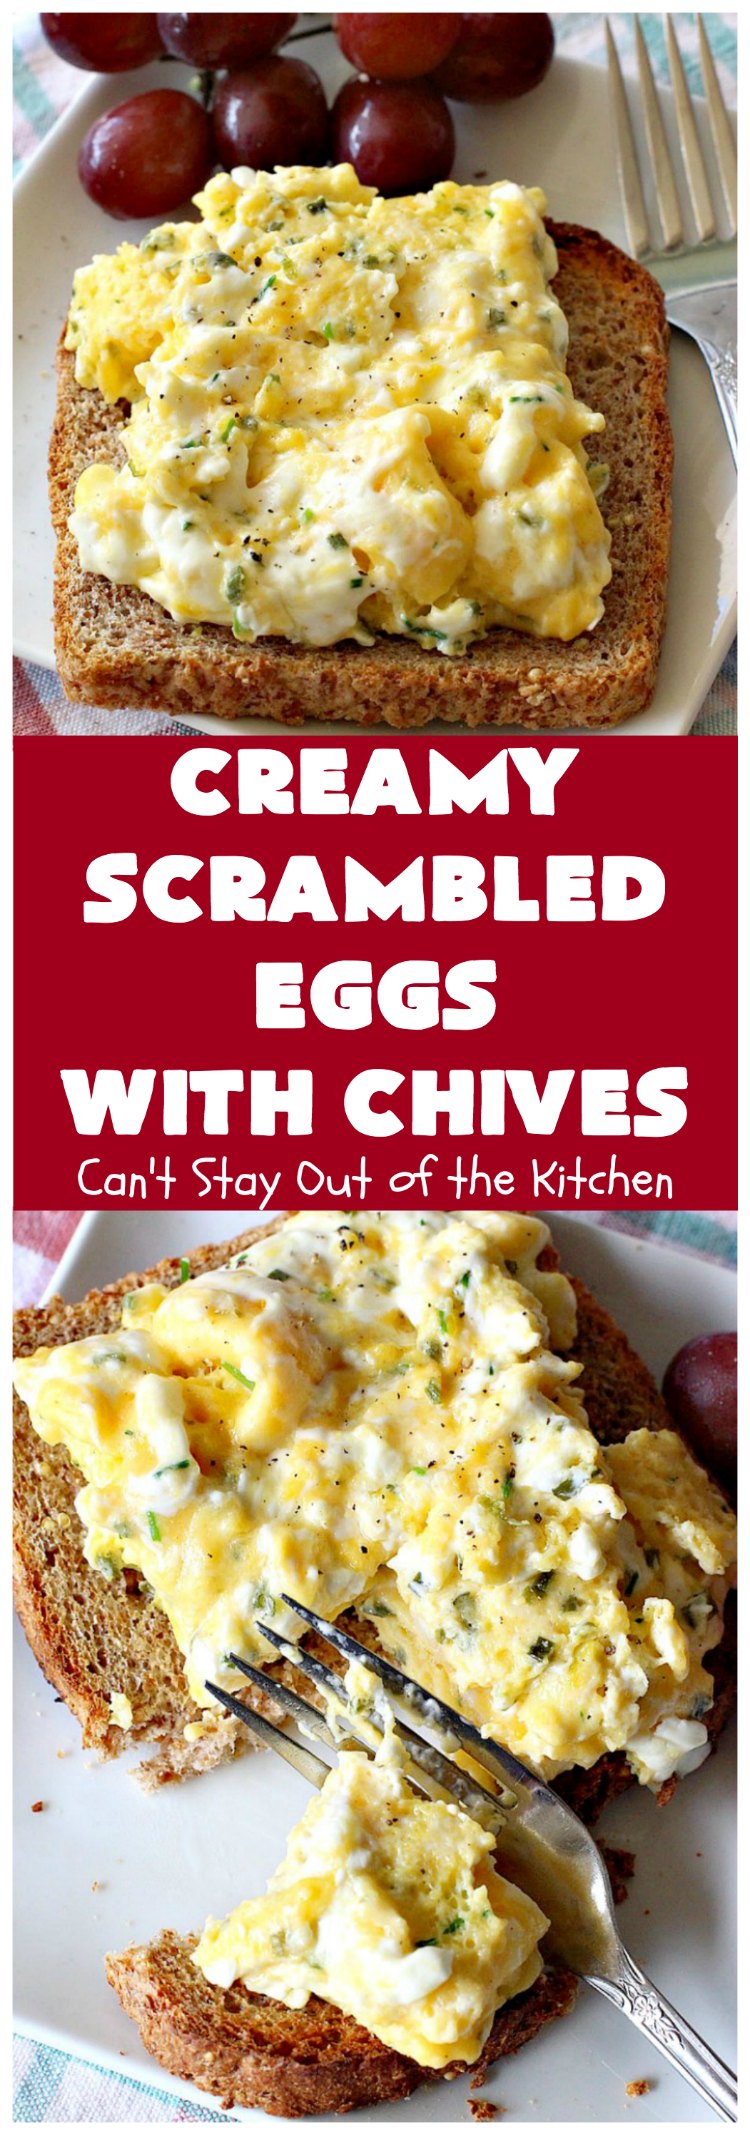 Creamy Scrambled Eggs with Chives | Can't Stay Out of the Kitchen | this outstanding #GooseberryPatch #recipe is marvelous for a weekend, company or #holiday #breakfast.  #ScrambledEggs are filled with #CreamCheese & chives. Then served over toast. These creamy #eggs are easy to prepare & so delicious. #brunch #HolidayBreakfast #CreamyScrambledEggsWithChives